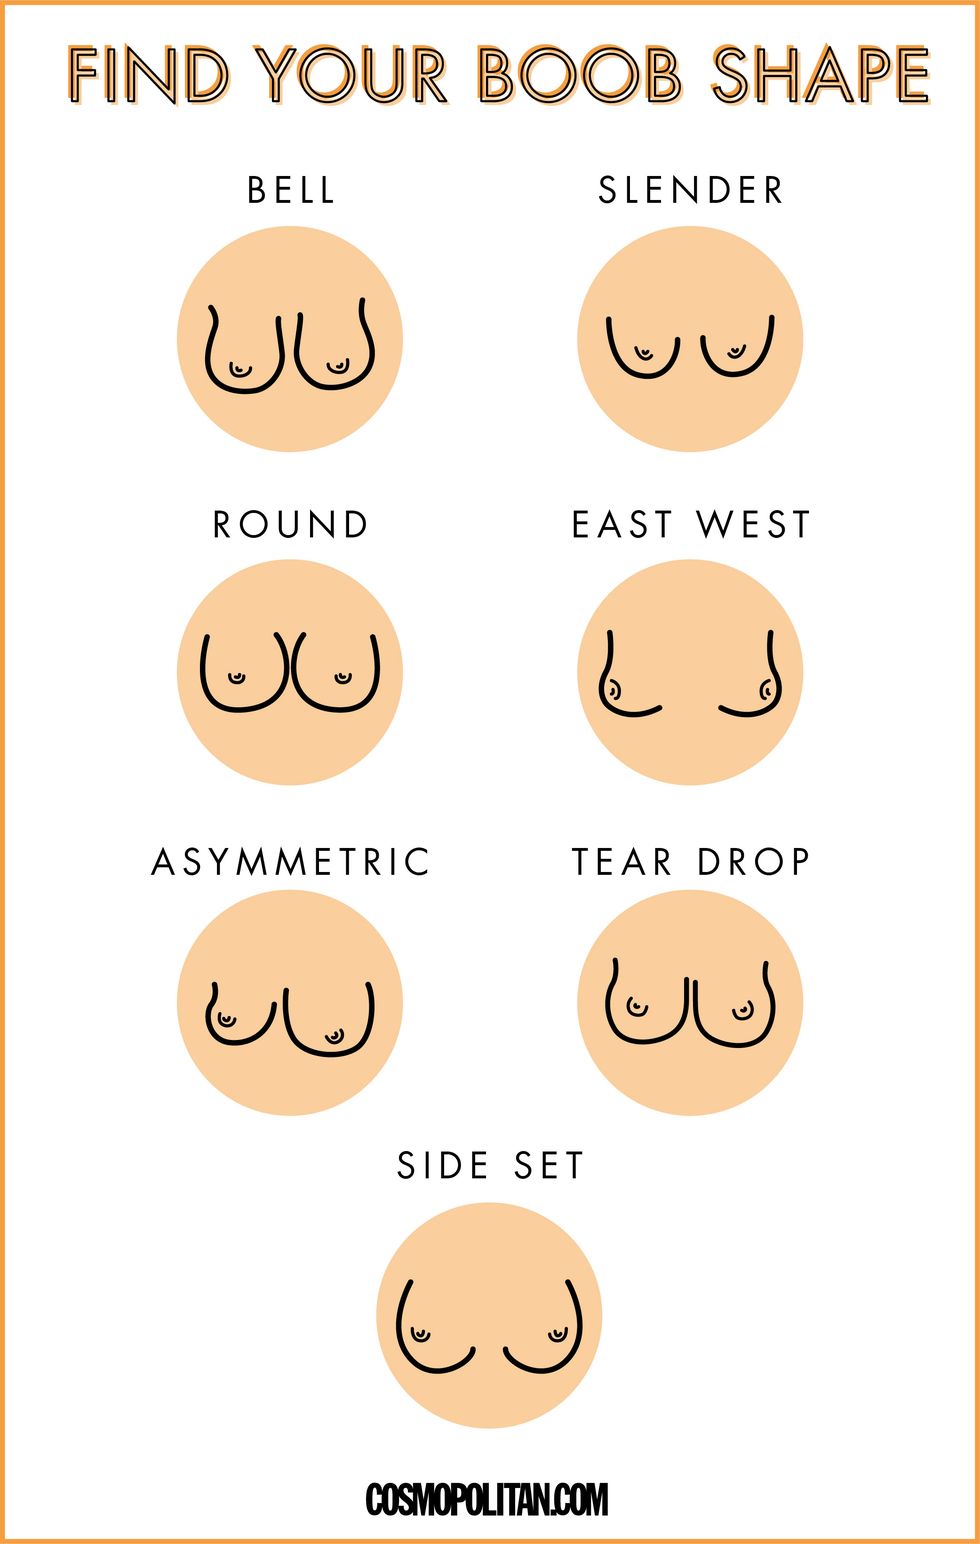 Side Set Boobs: What You Should Know